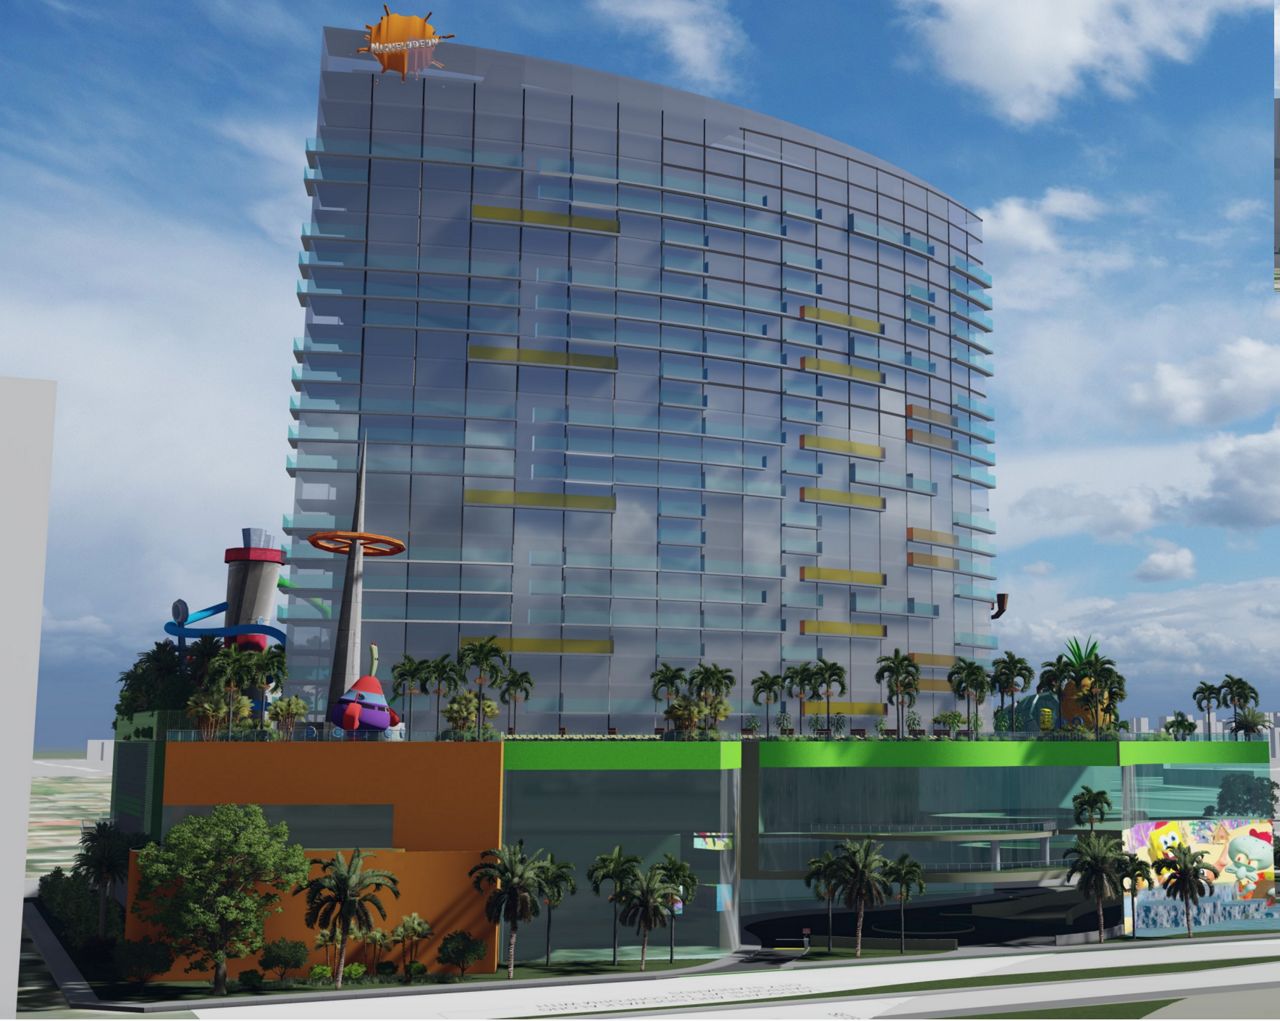 A Nickelodeon-themed hotel is coming to Garden Grove